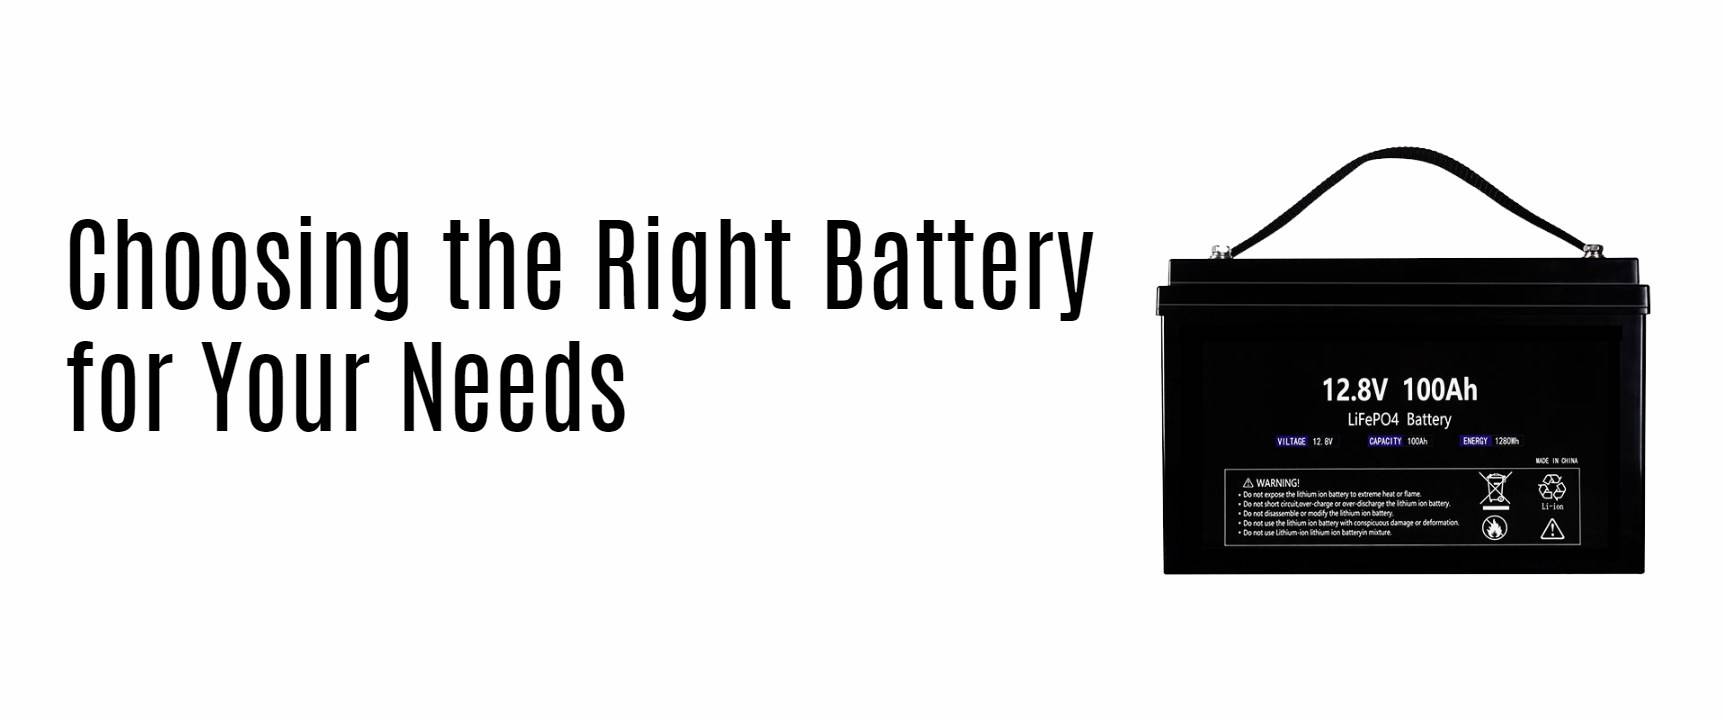 Choosing the Right Battery for Your Needs